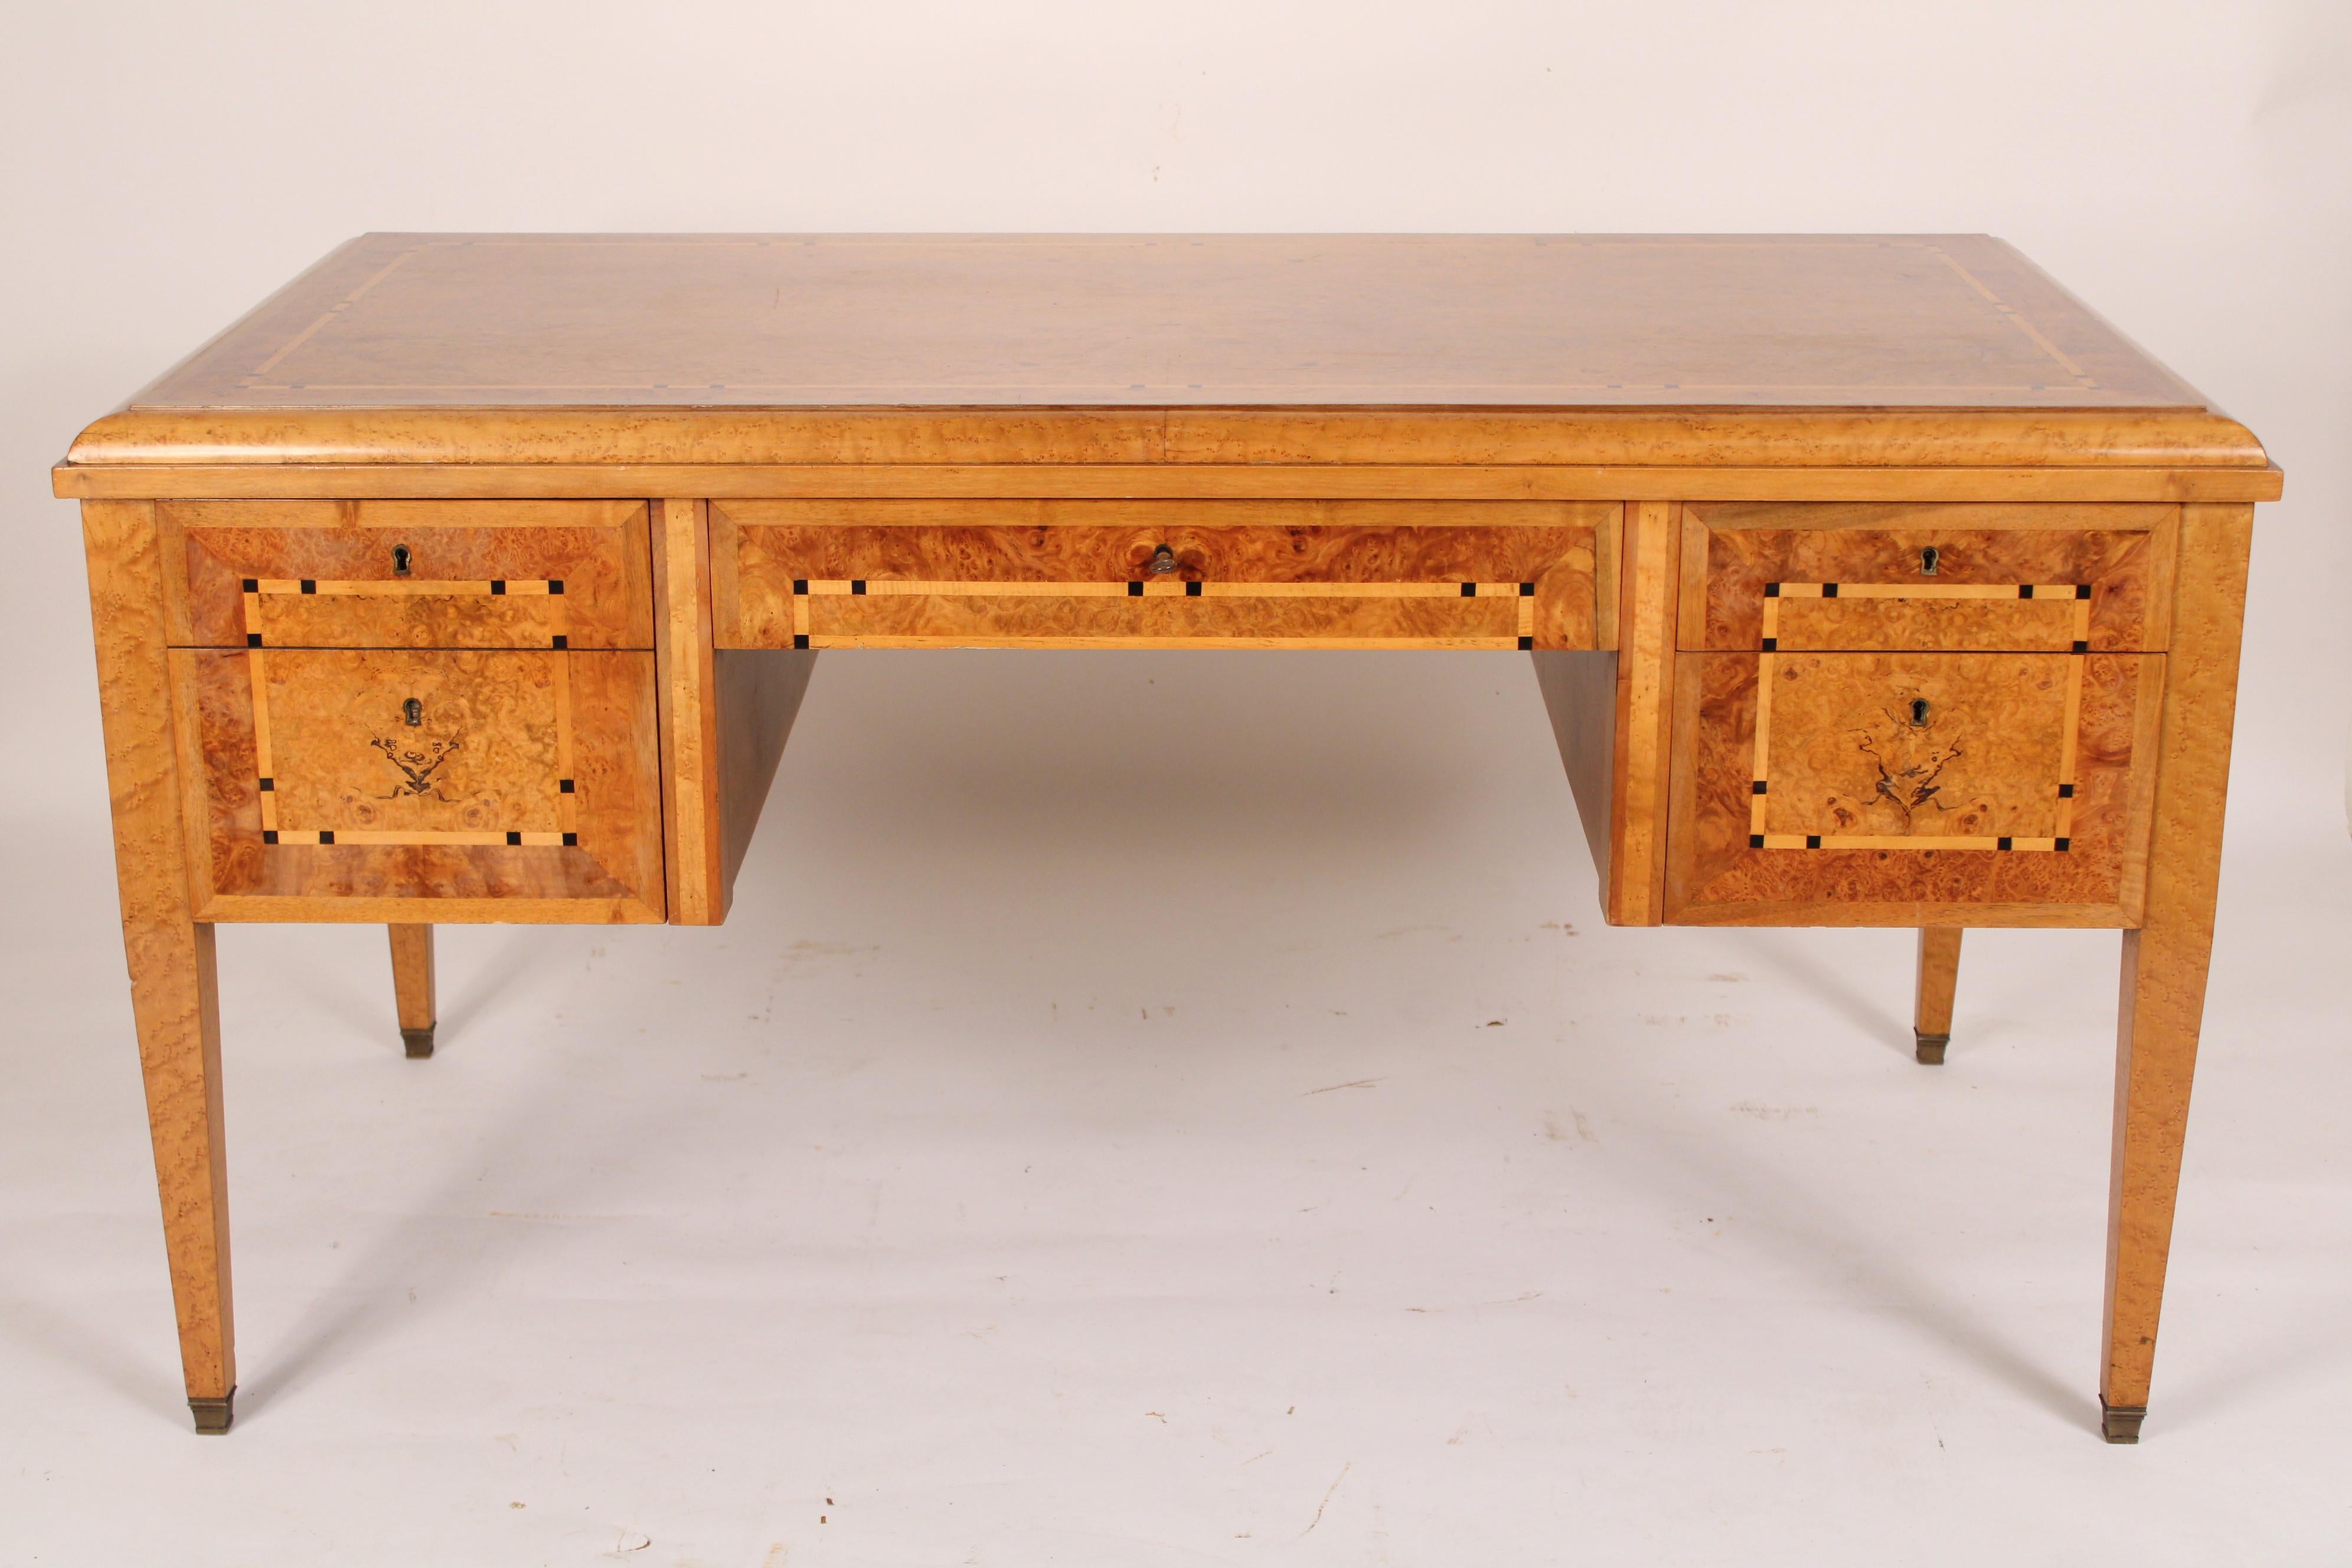 Art Deco burl ash and inlaid writing table, circa 1930's. With an inlaid burl ash top, the front of the desk with a single file drawer on the left side and two drawers on the right side of the knee hole and a center drawer, resting on square tapered